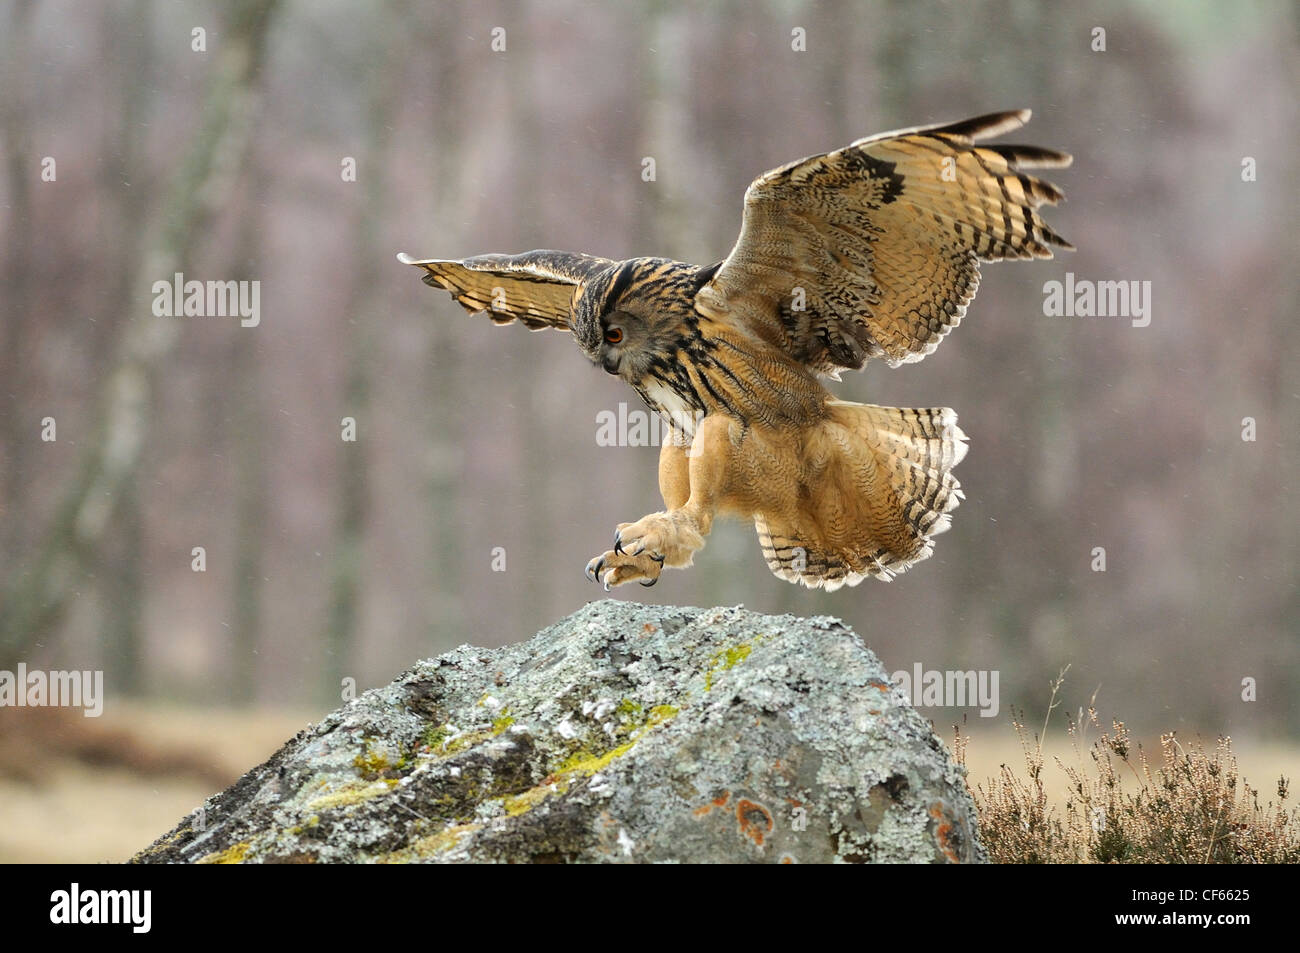 A European Eagle Owl (Bubo Bubo) about to land on a rock. Stock Photo